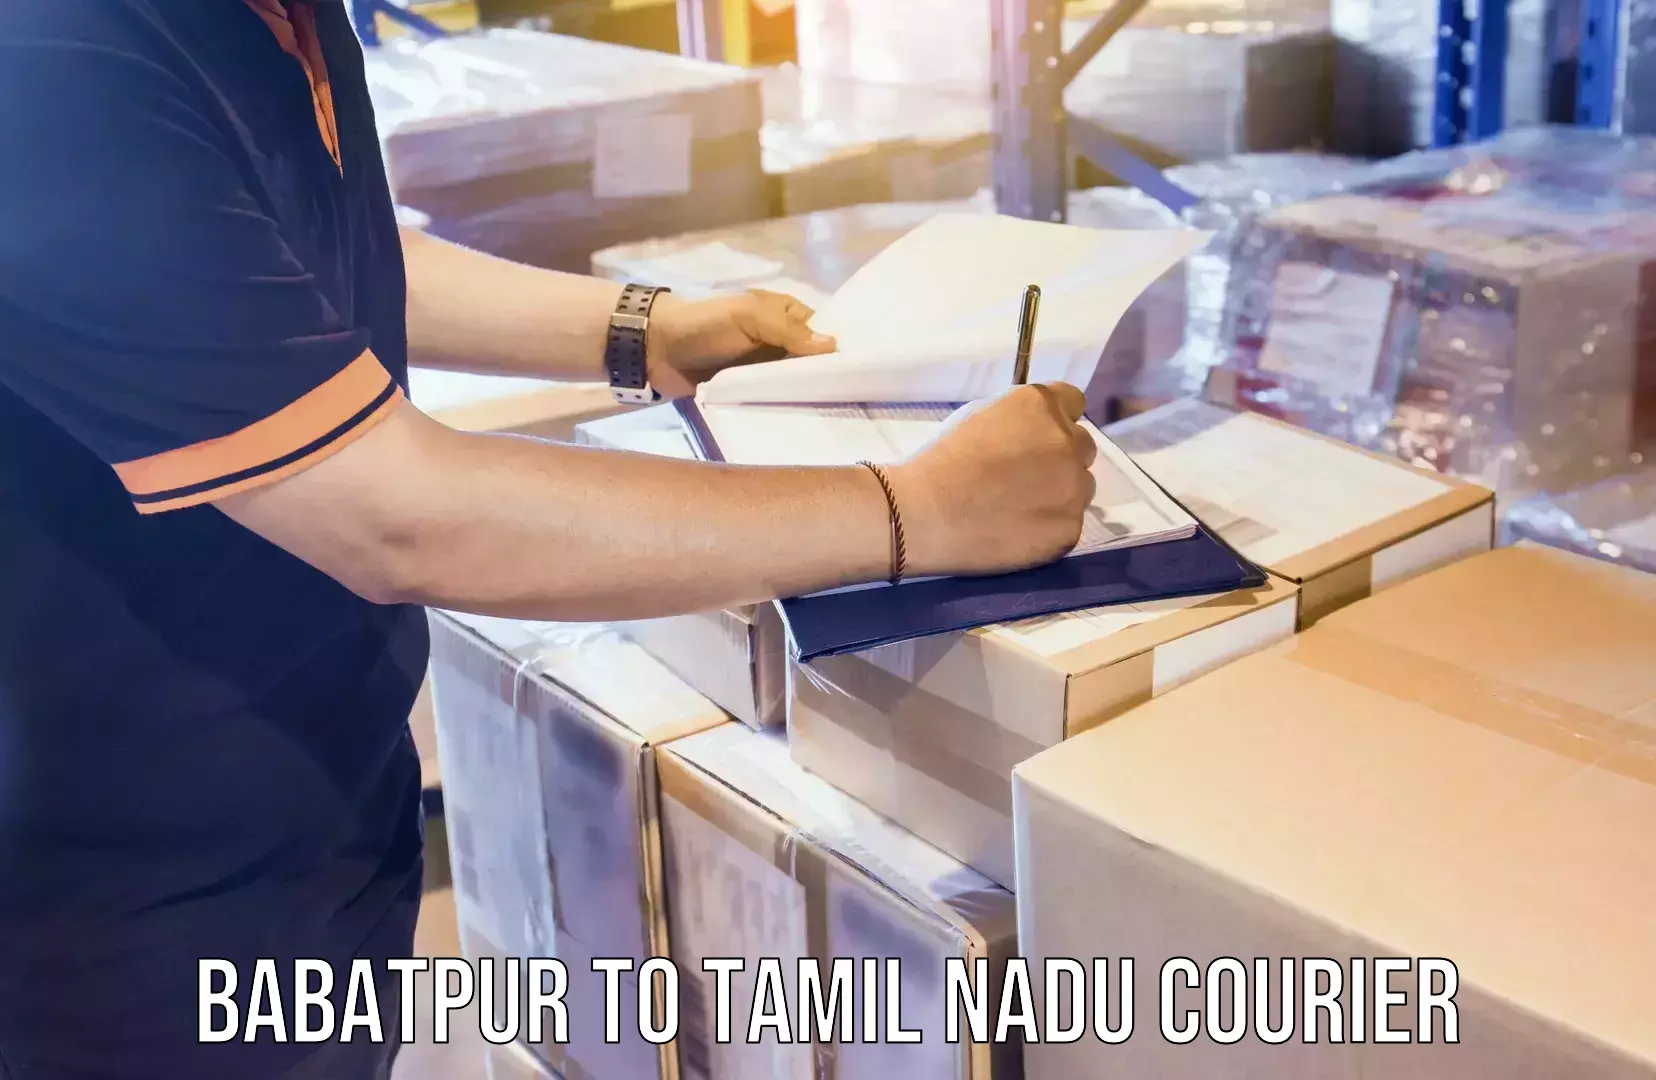 Easy access courier services Babatpur to Tamil Nadu